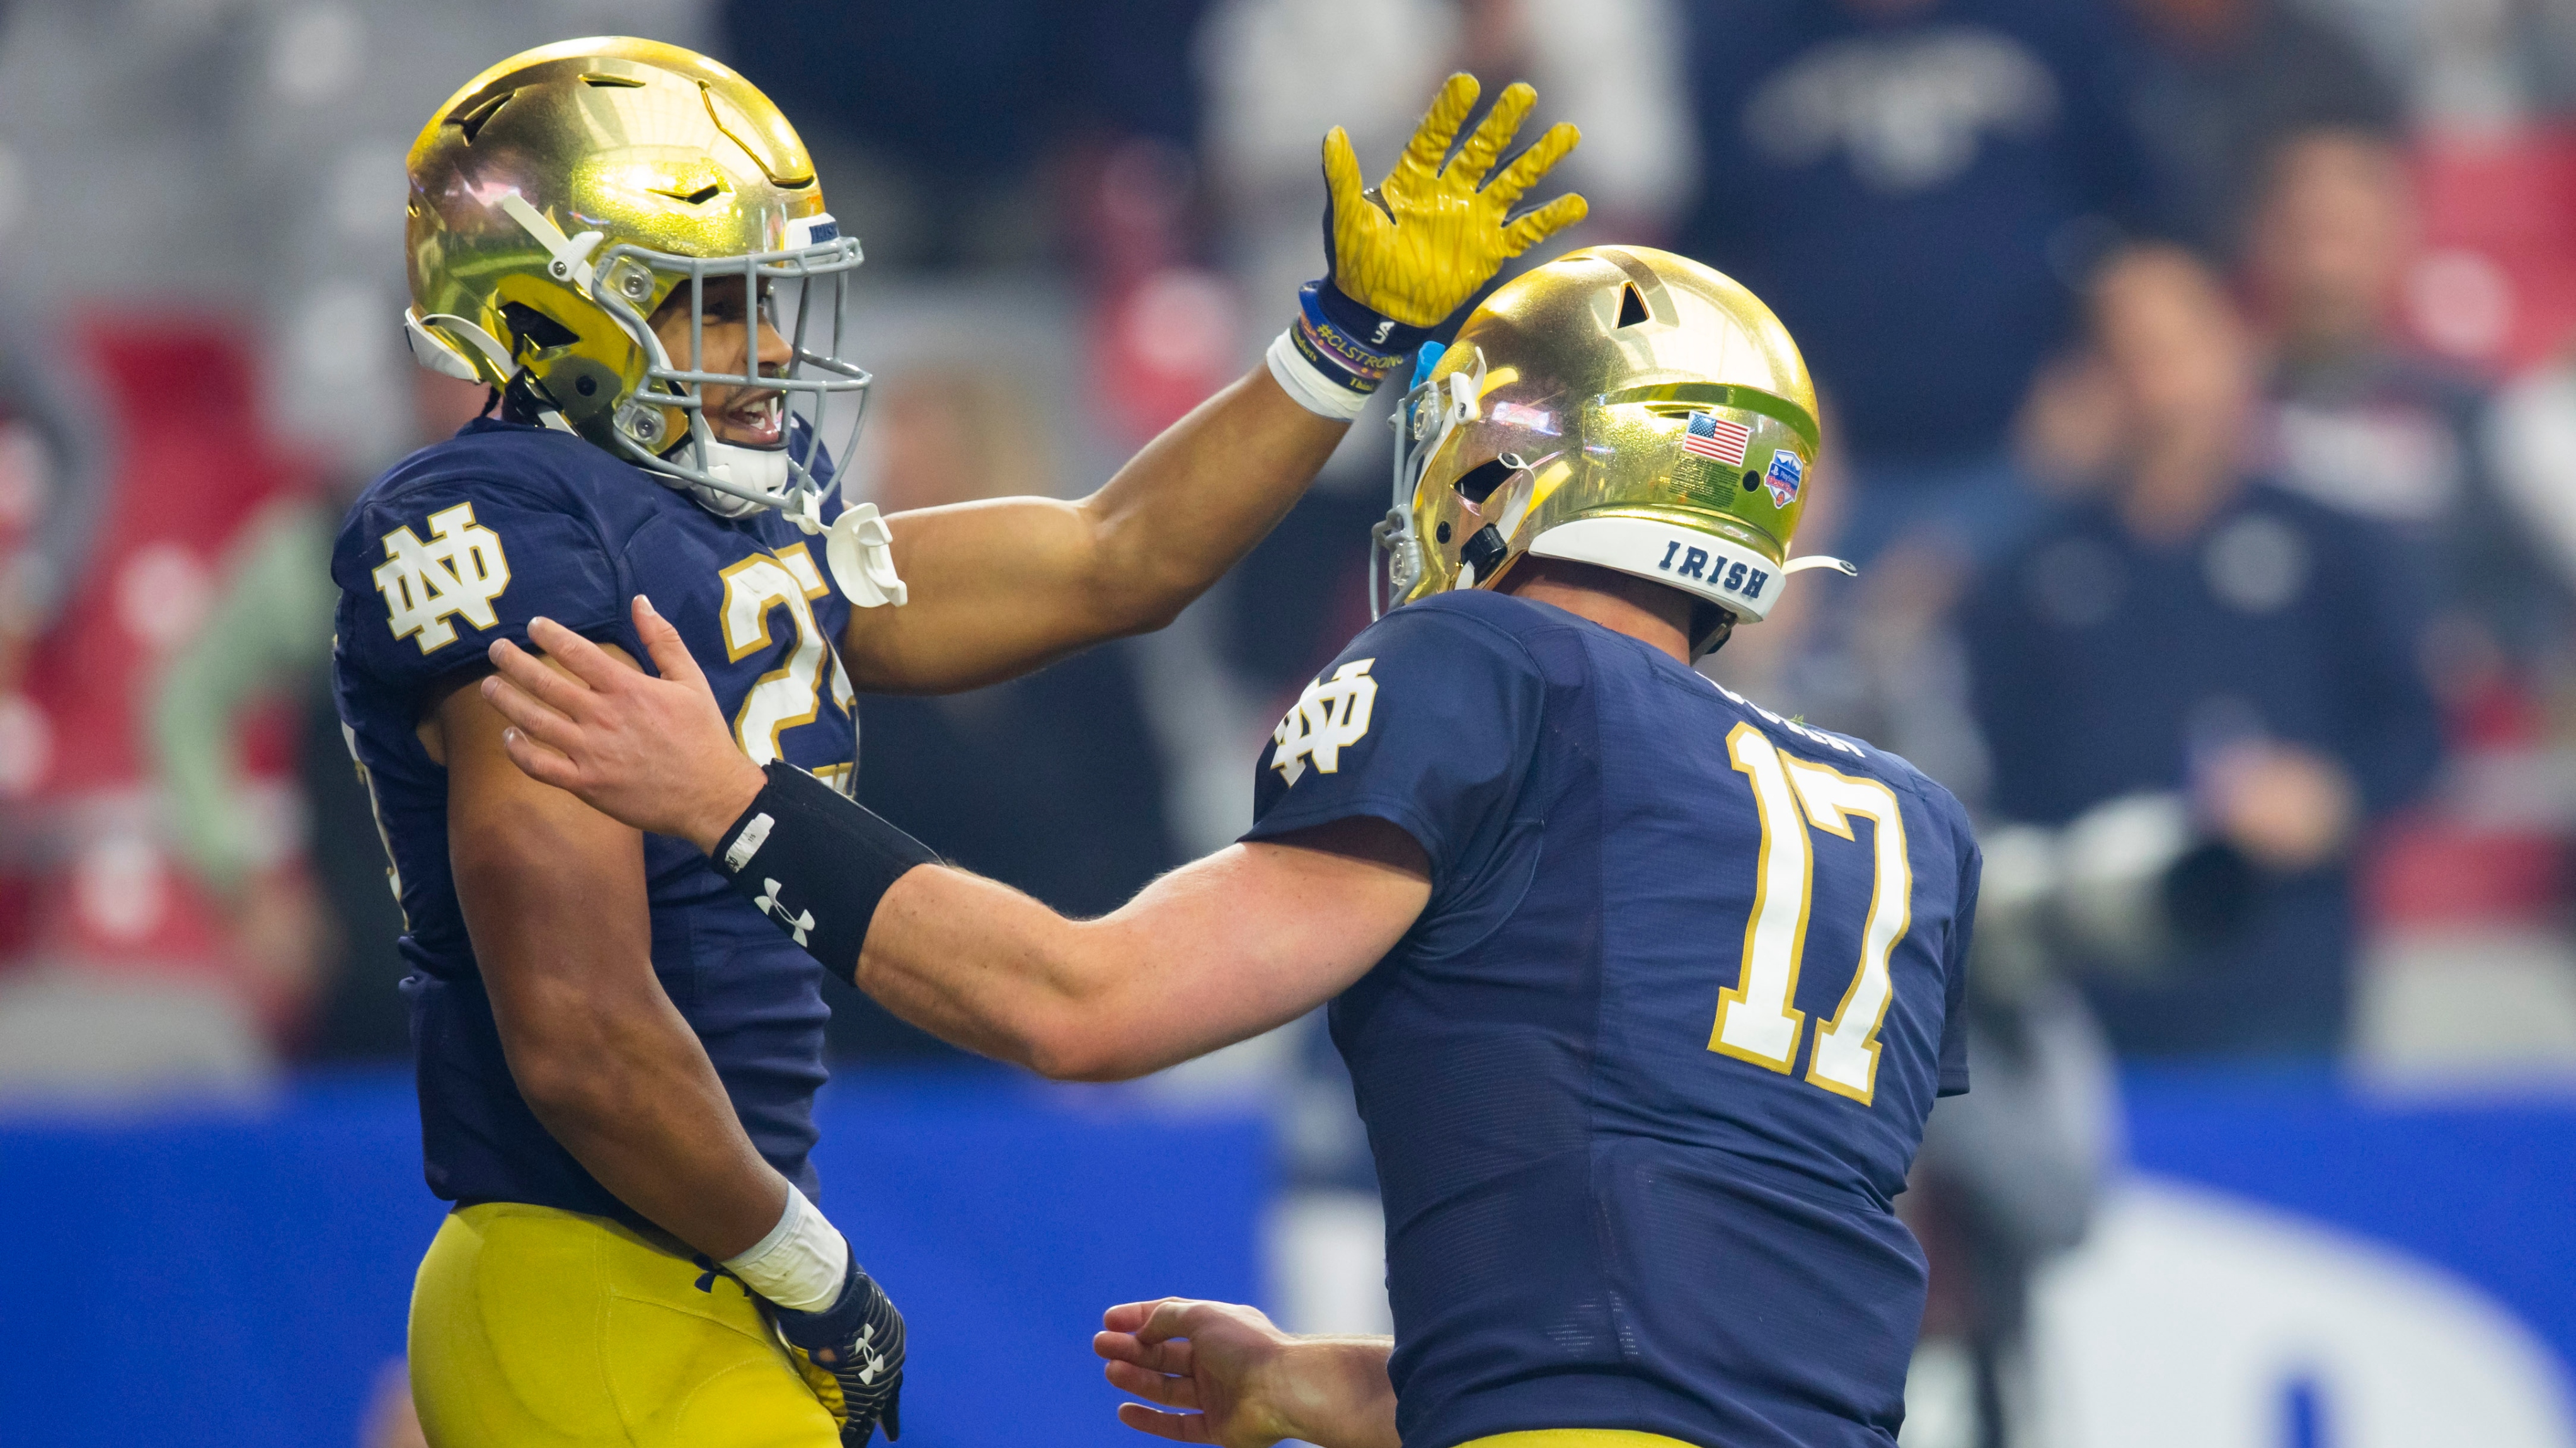 Source: Notre Dame Has One Preference Amid Conference Realignment - Sports Illustrated : The Irish remain independent in football, though the shifting landscape of conference realignment raises questions about the program’s future affiliation.  | Tranquility 國際社群